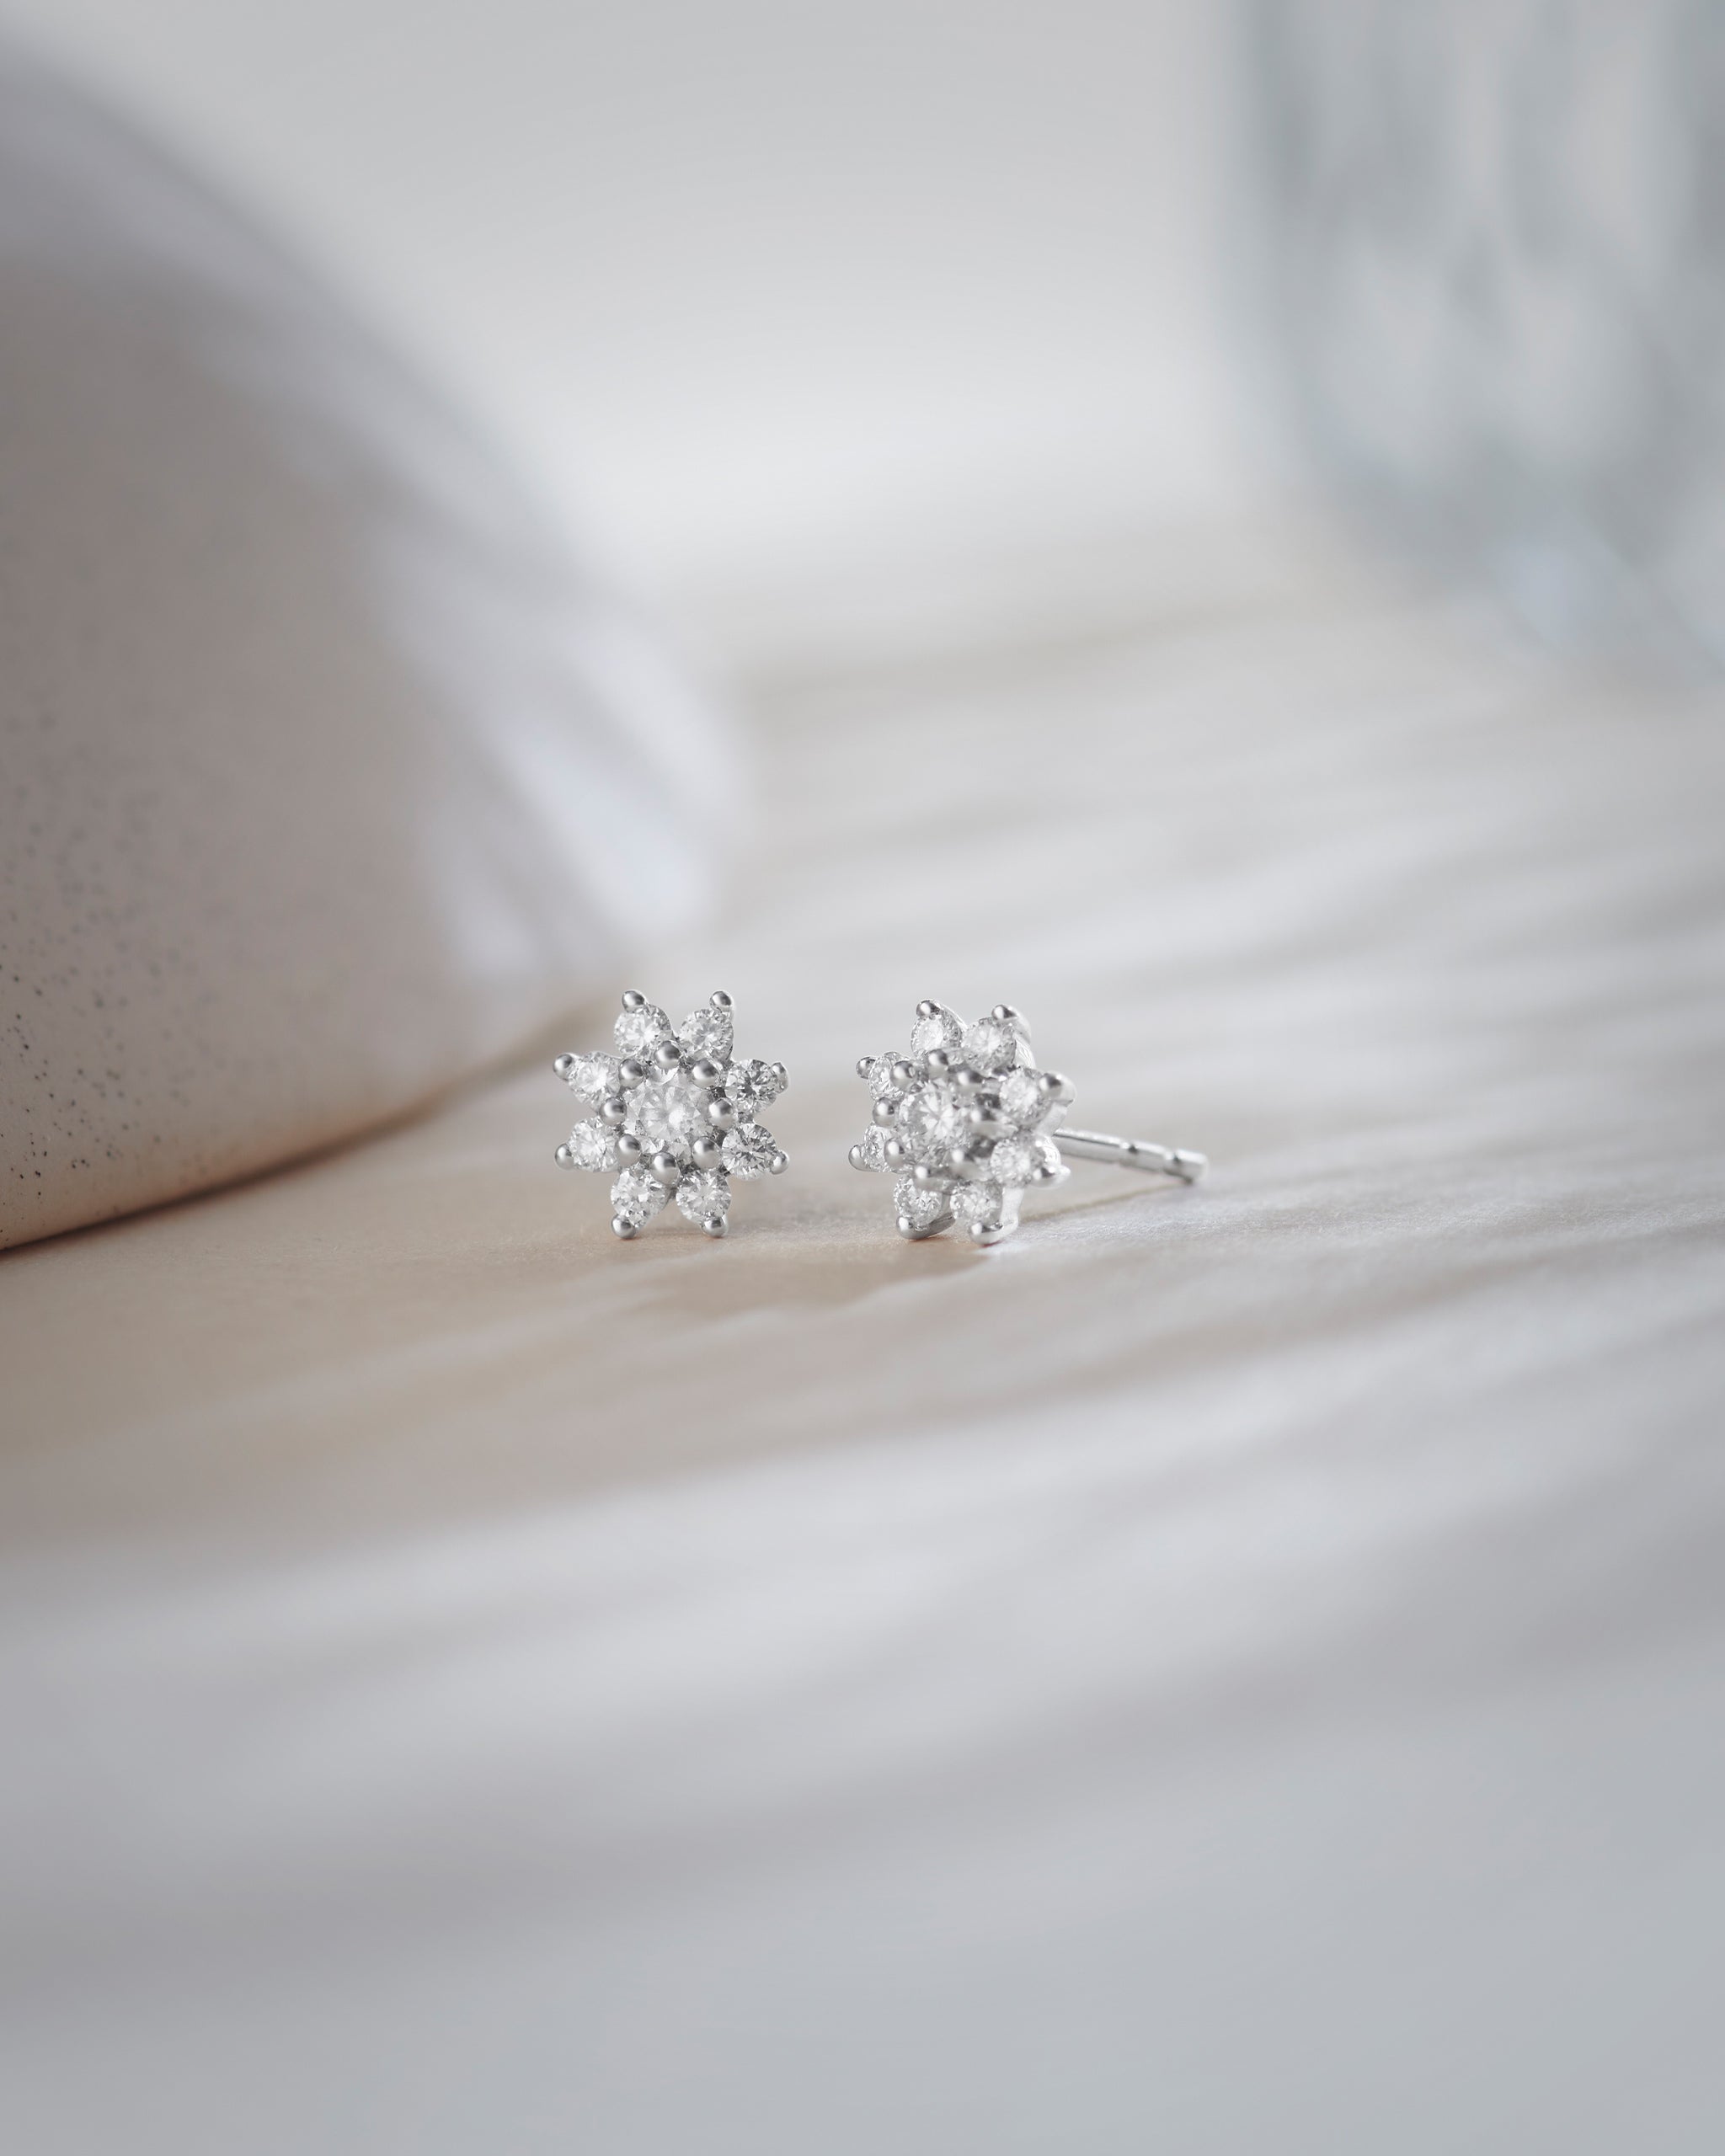 Floral Small Round Diamond Earrings